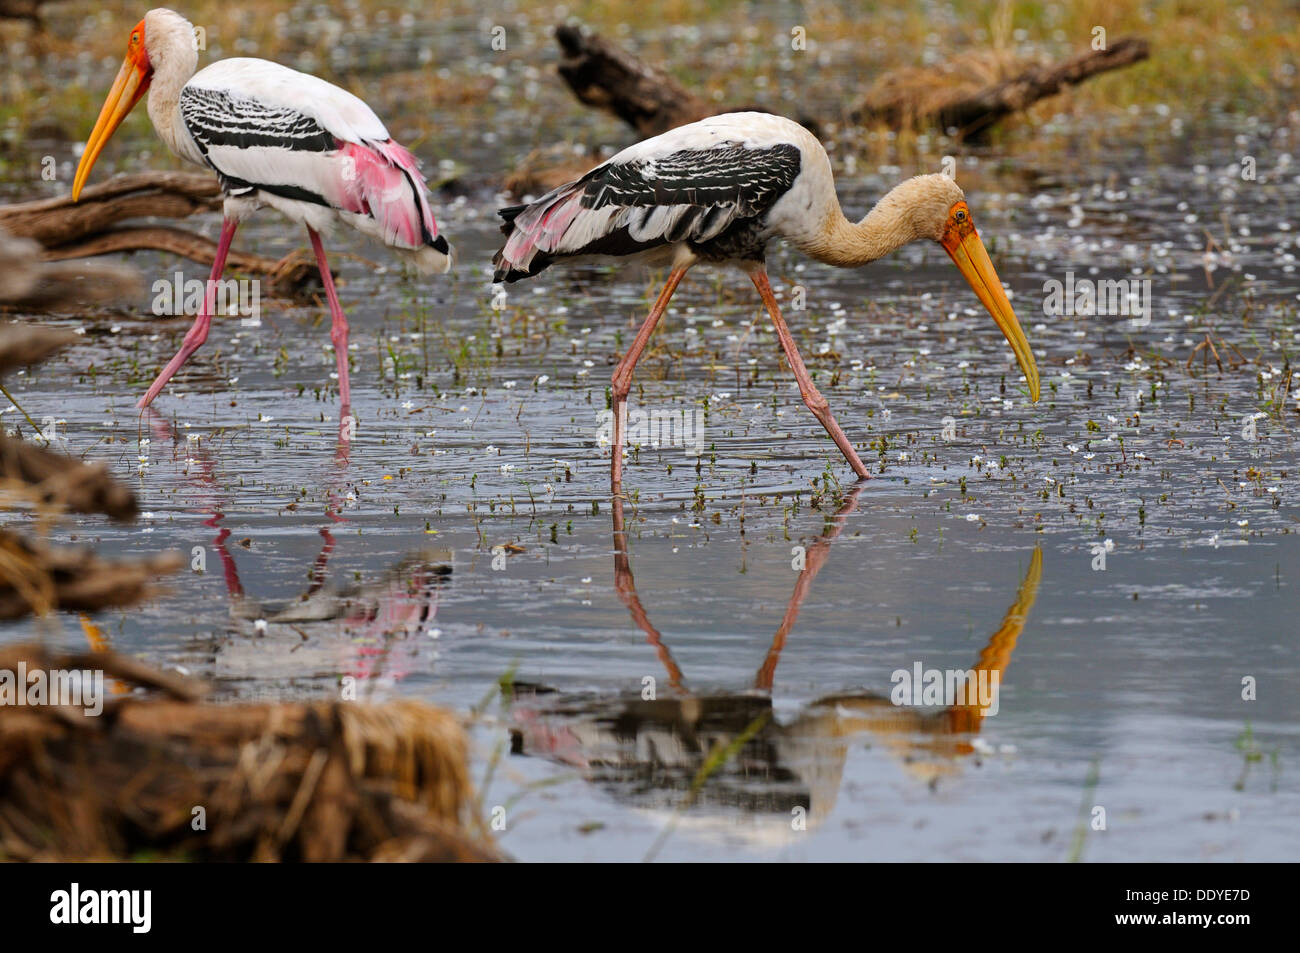 Two Painted Storks (Mycteria leucocephala) foraging in a lake in Ranthambore National Park, Rajasthan, India, Asia Stock Photo